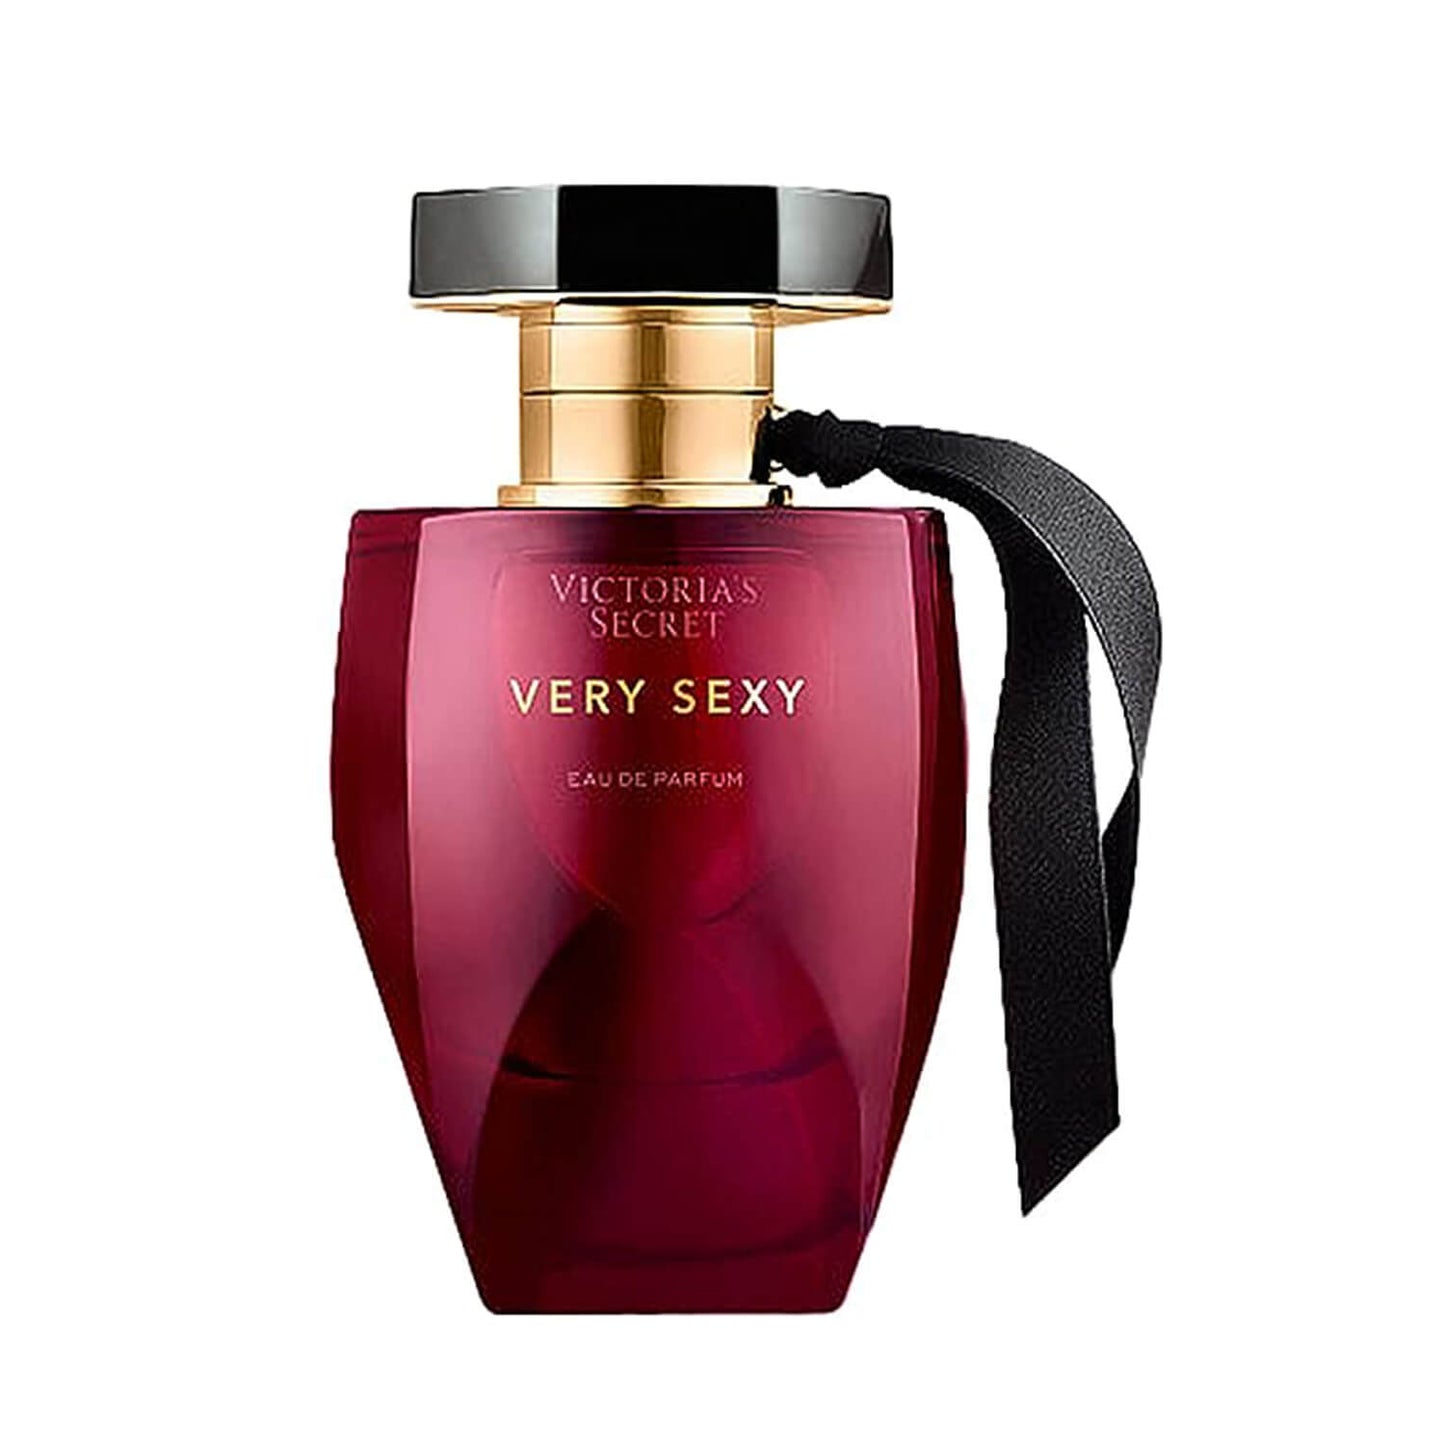 Shop Victoria's Secret Eau De Parfum in Very Sexy fragrance available at Heygirl.pk for delivery in Pakistan